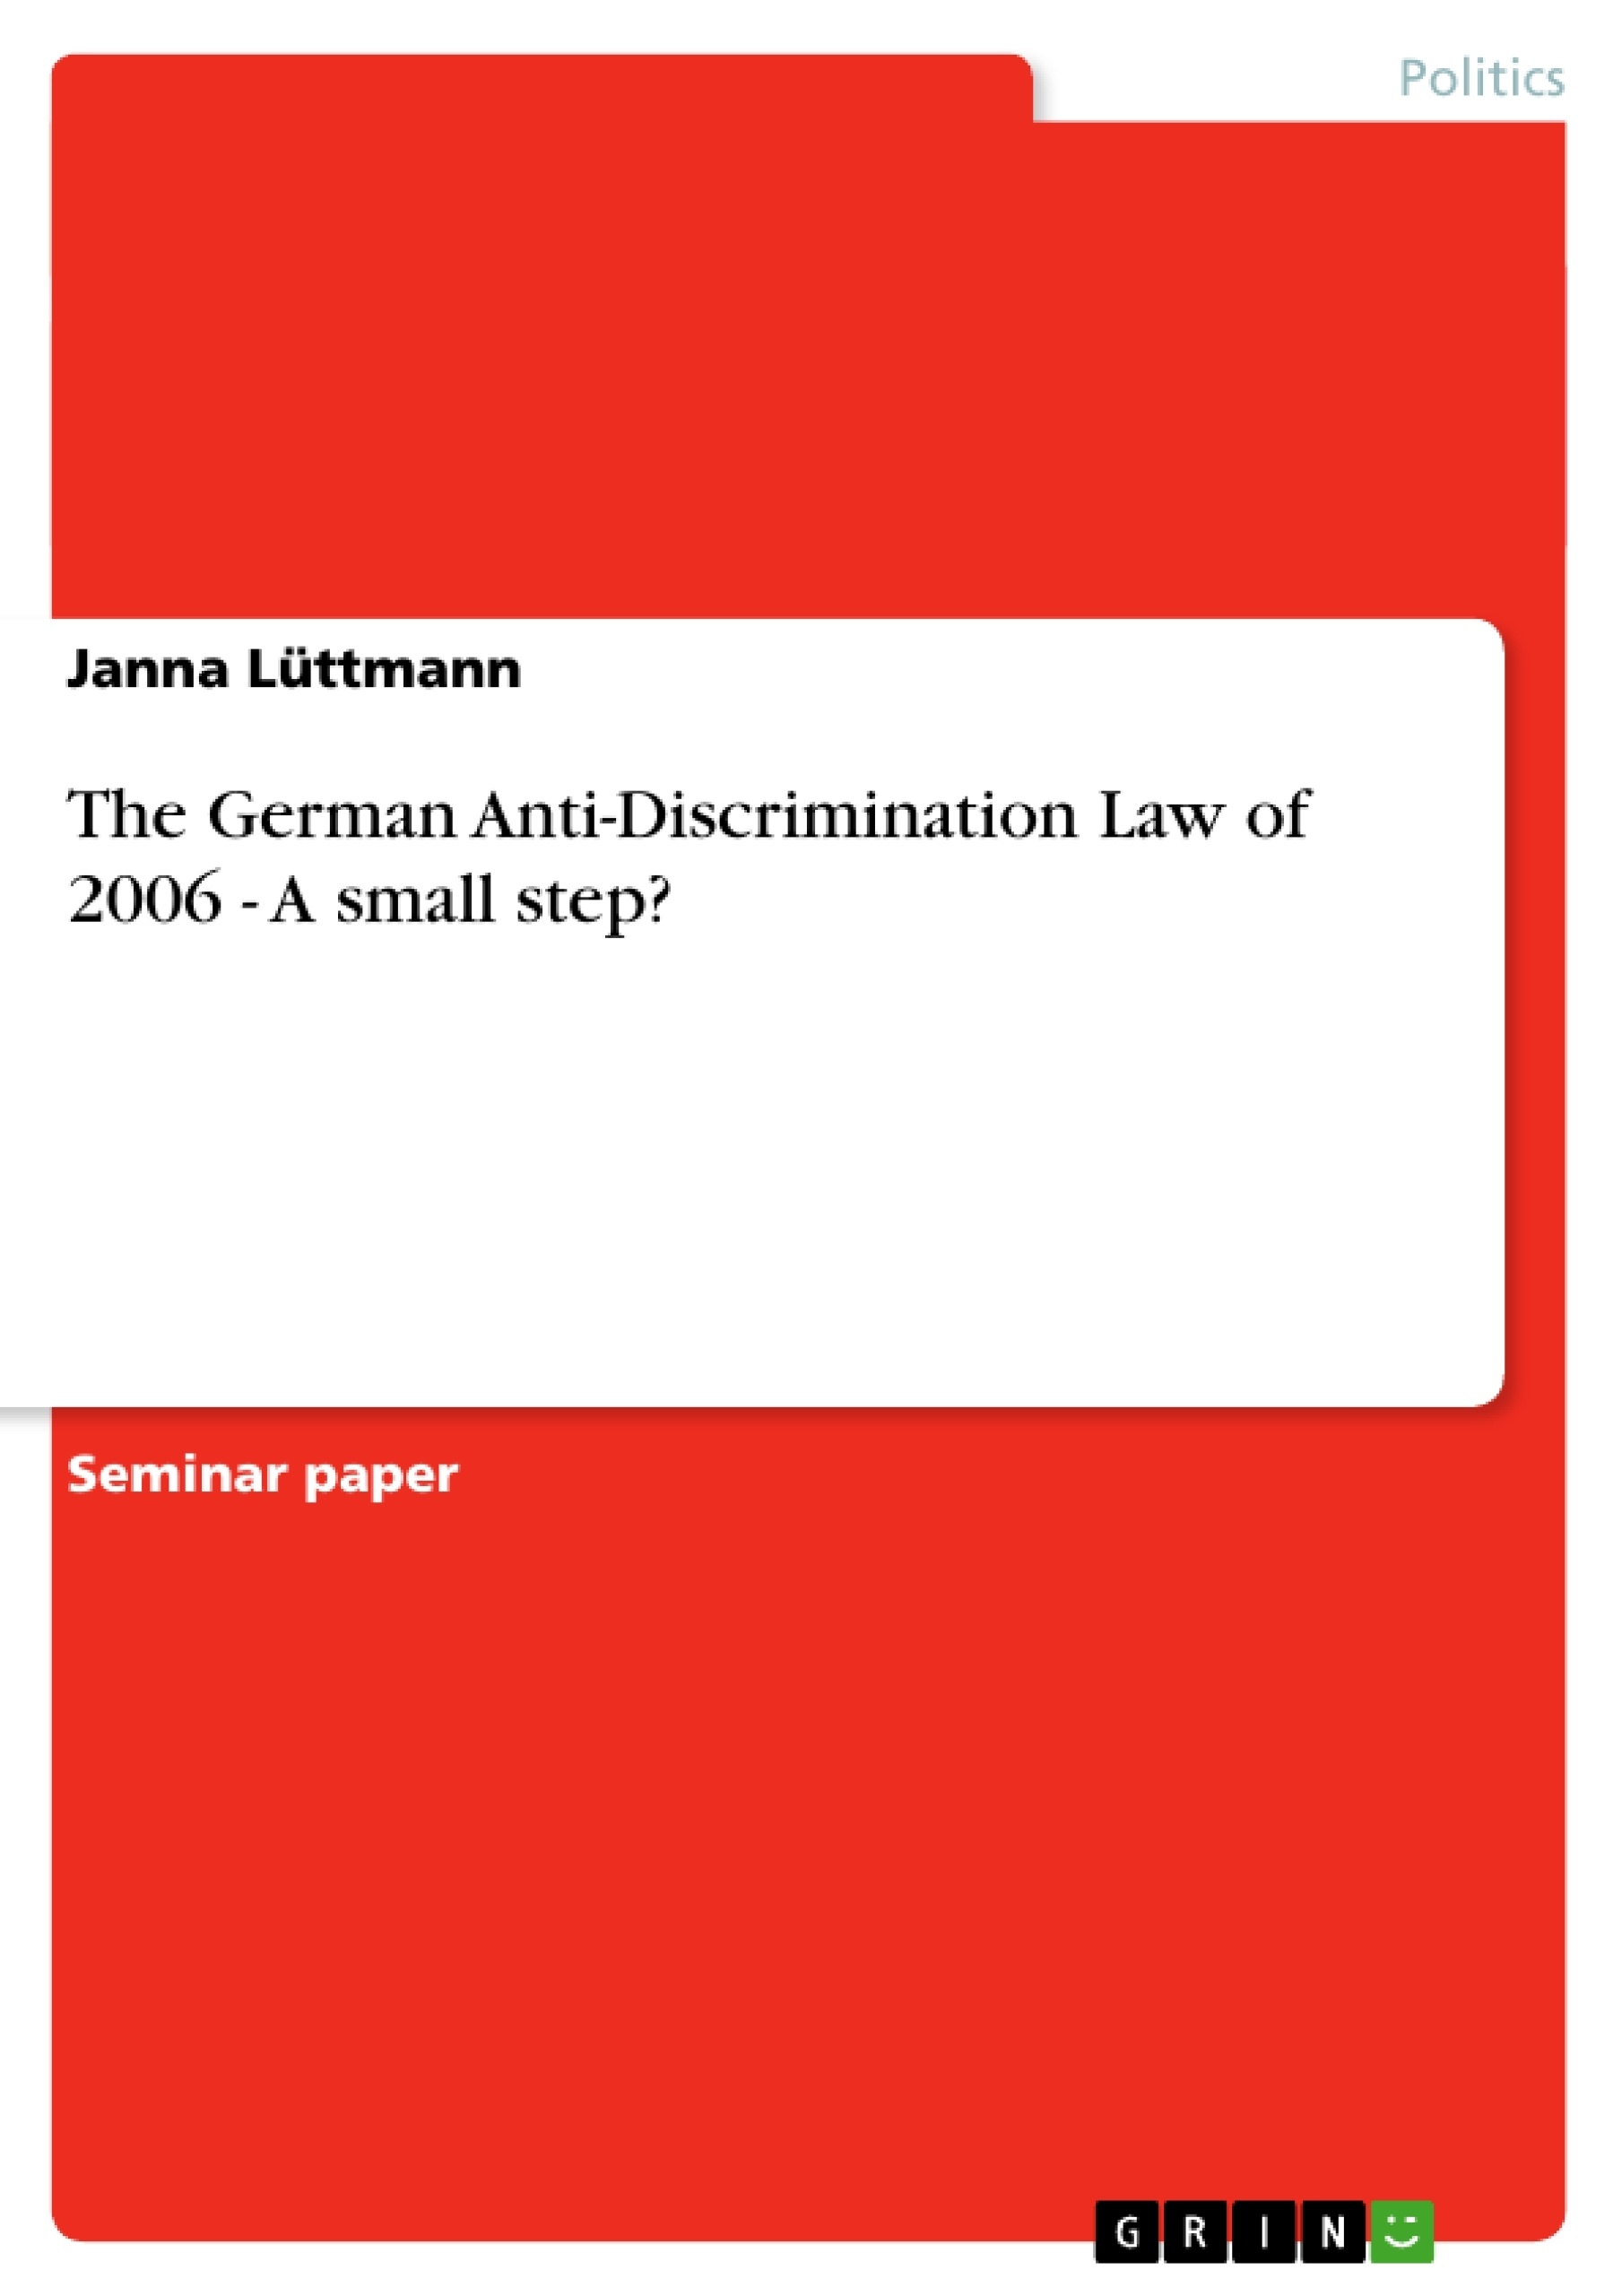 Title: The German Anti-Discrimination Law of 2006 - A small step?